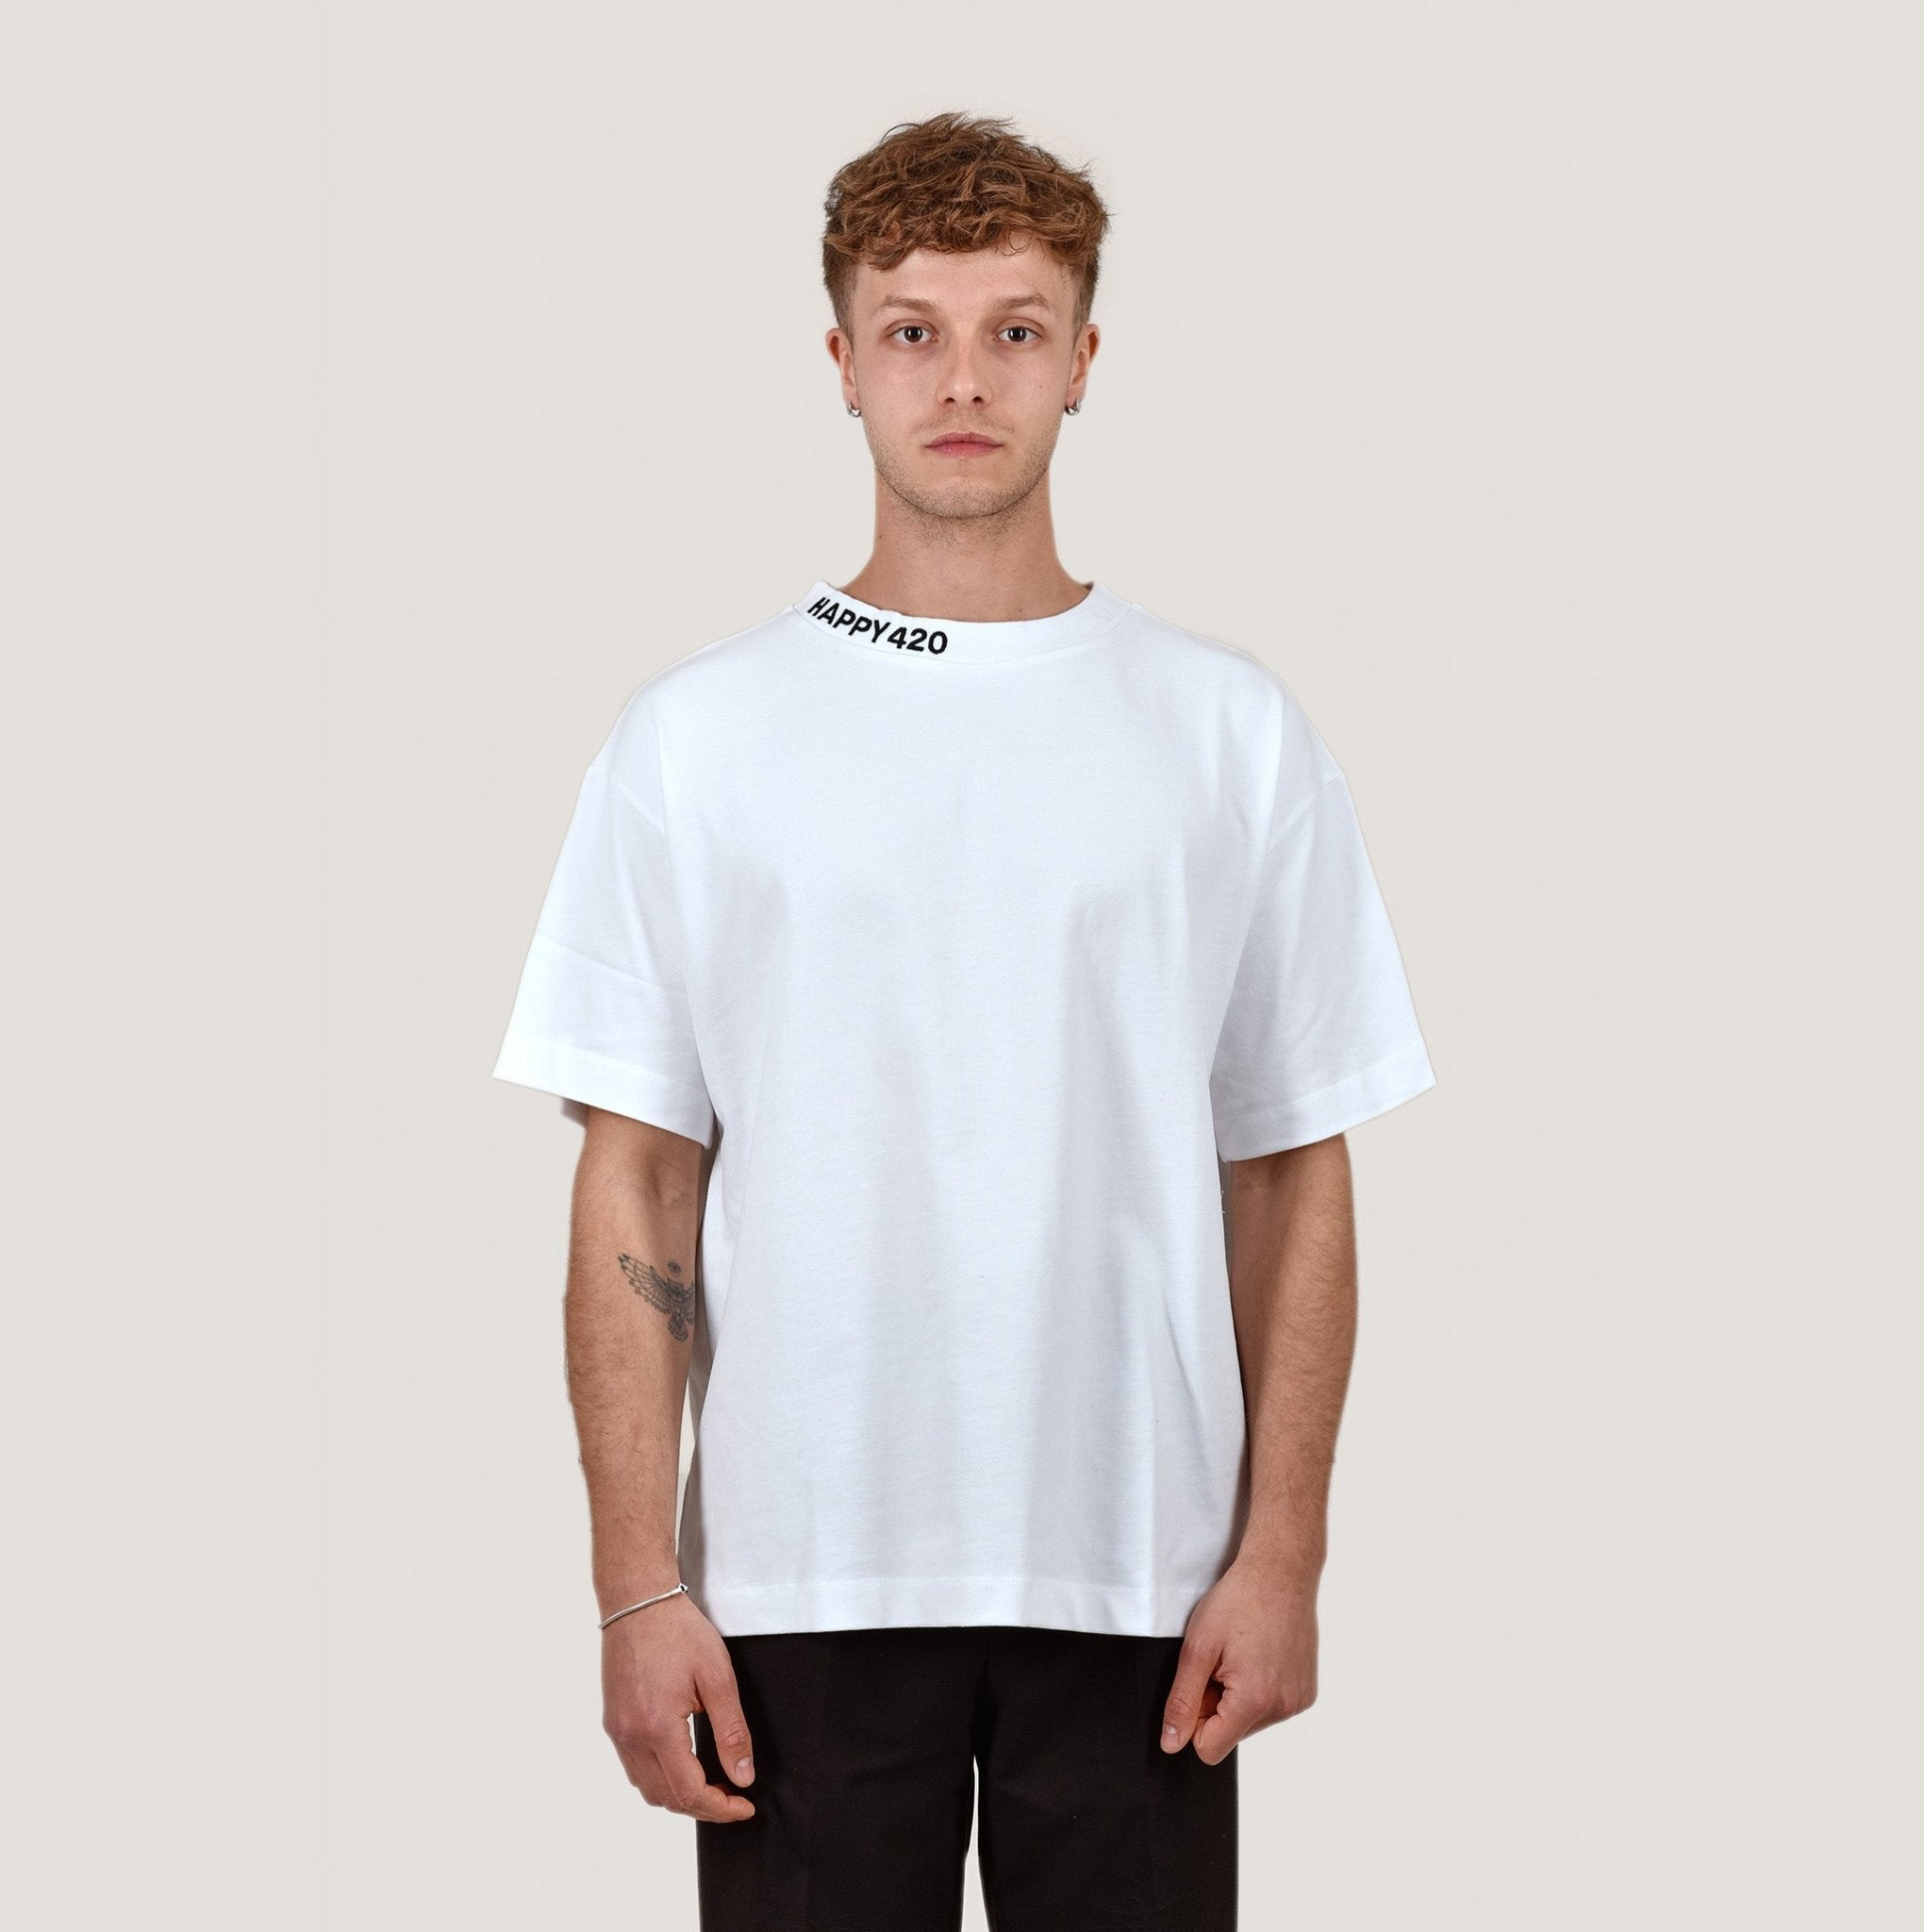 T - col oversize avec broderie blanche - Happy420.fr